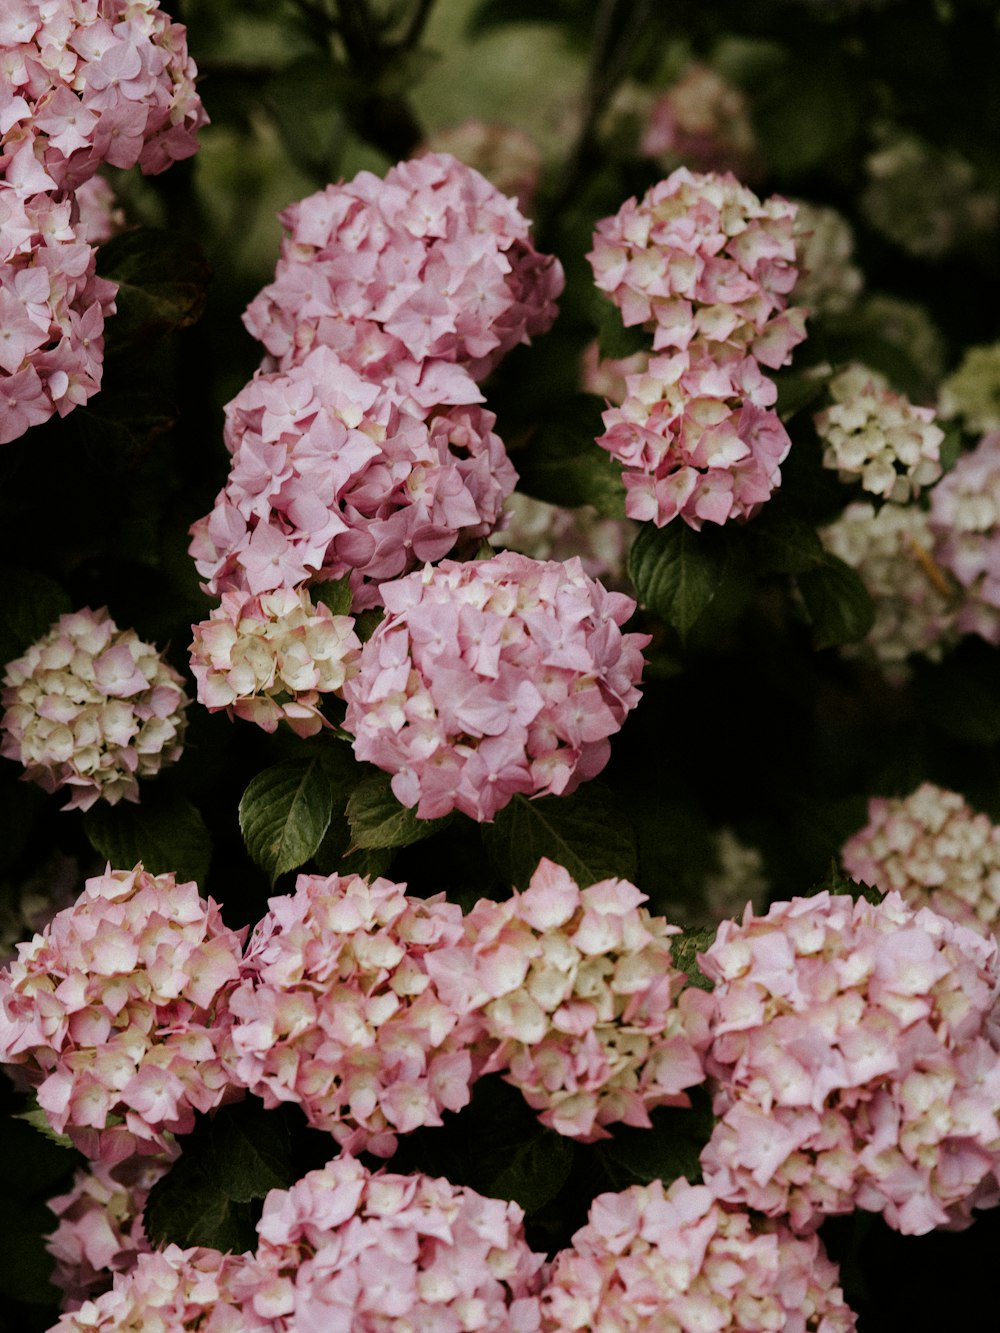 pink and white flowers with green leaves